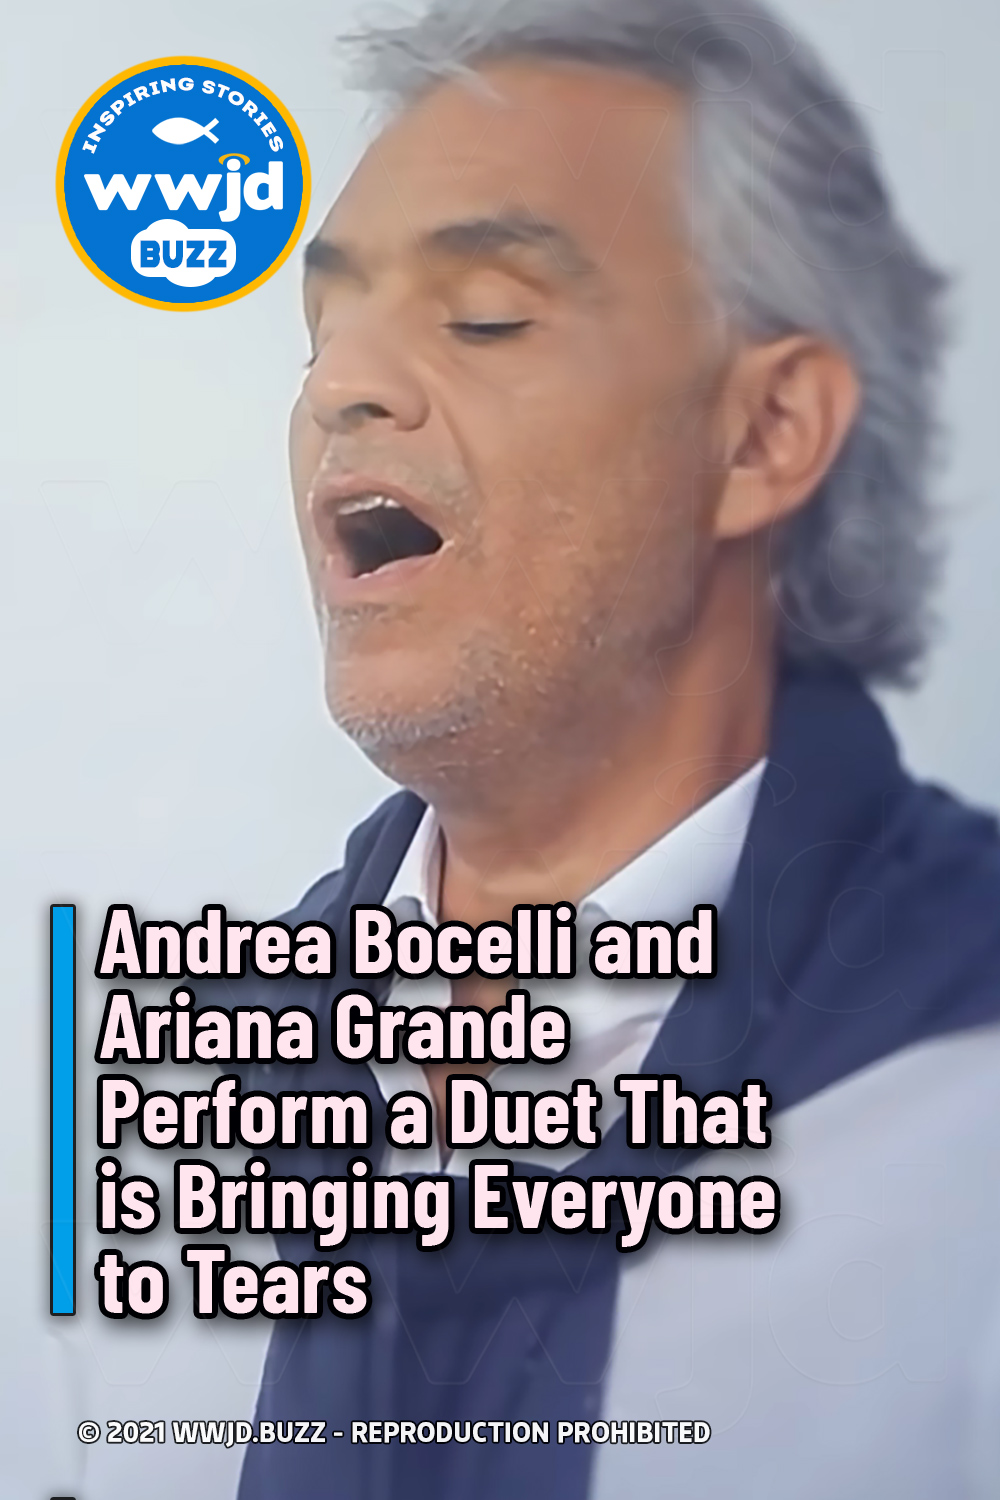 Andrea Bocelli and Ariana Grande Perform a Duet That is Bringing Everyone to Tears